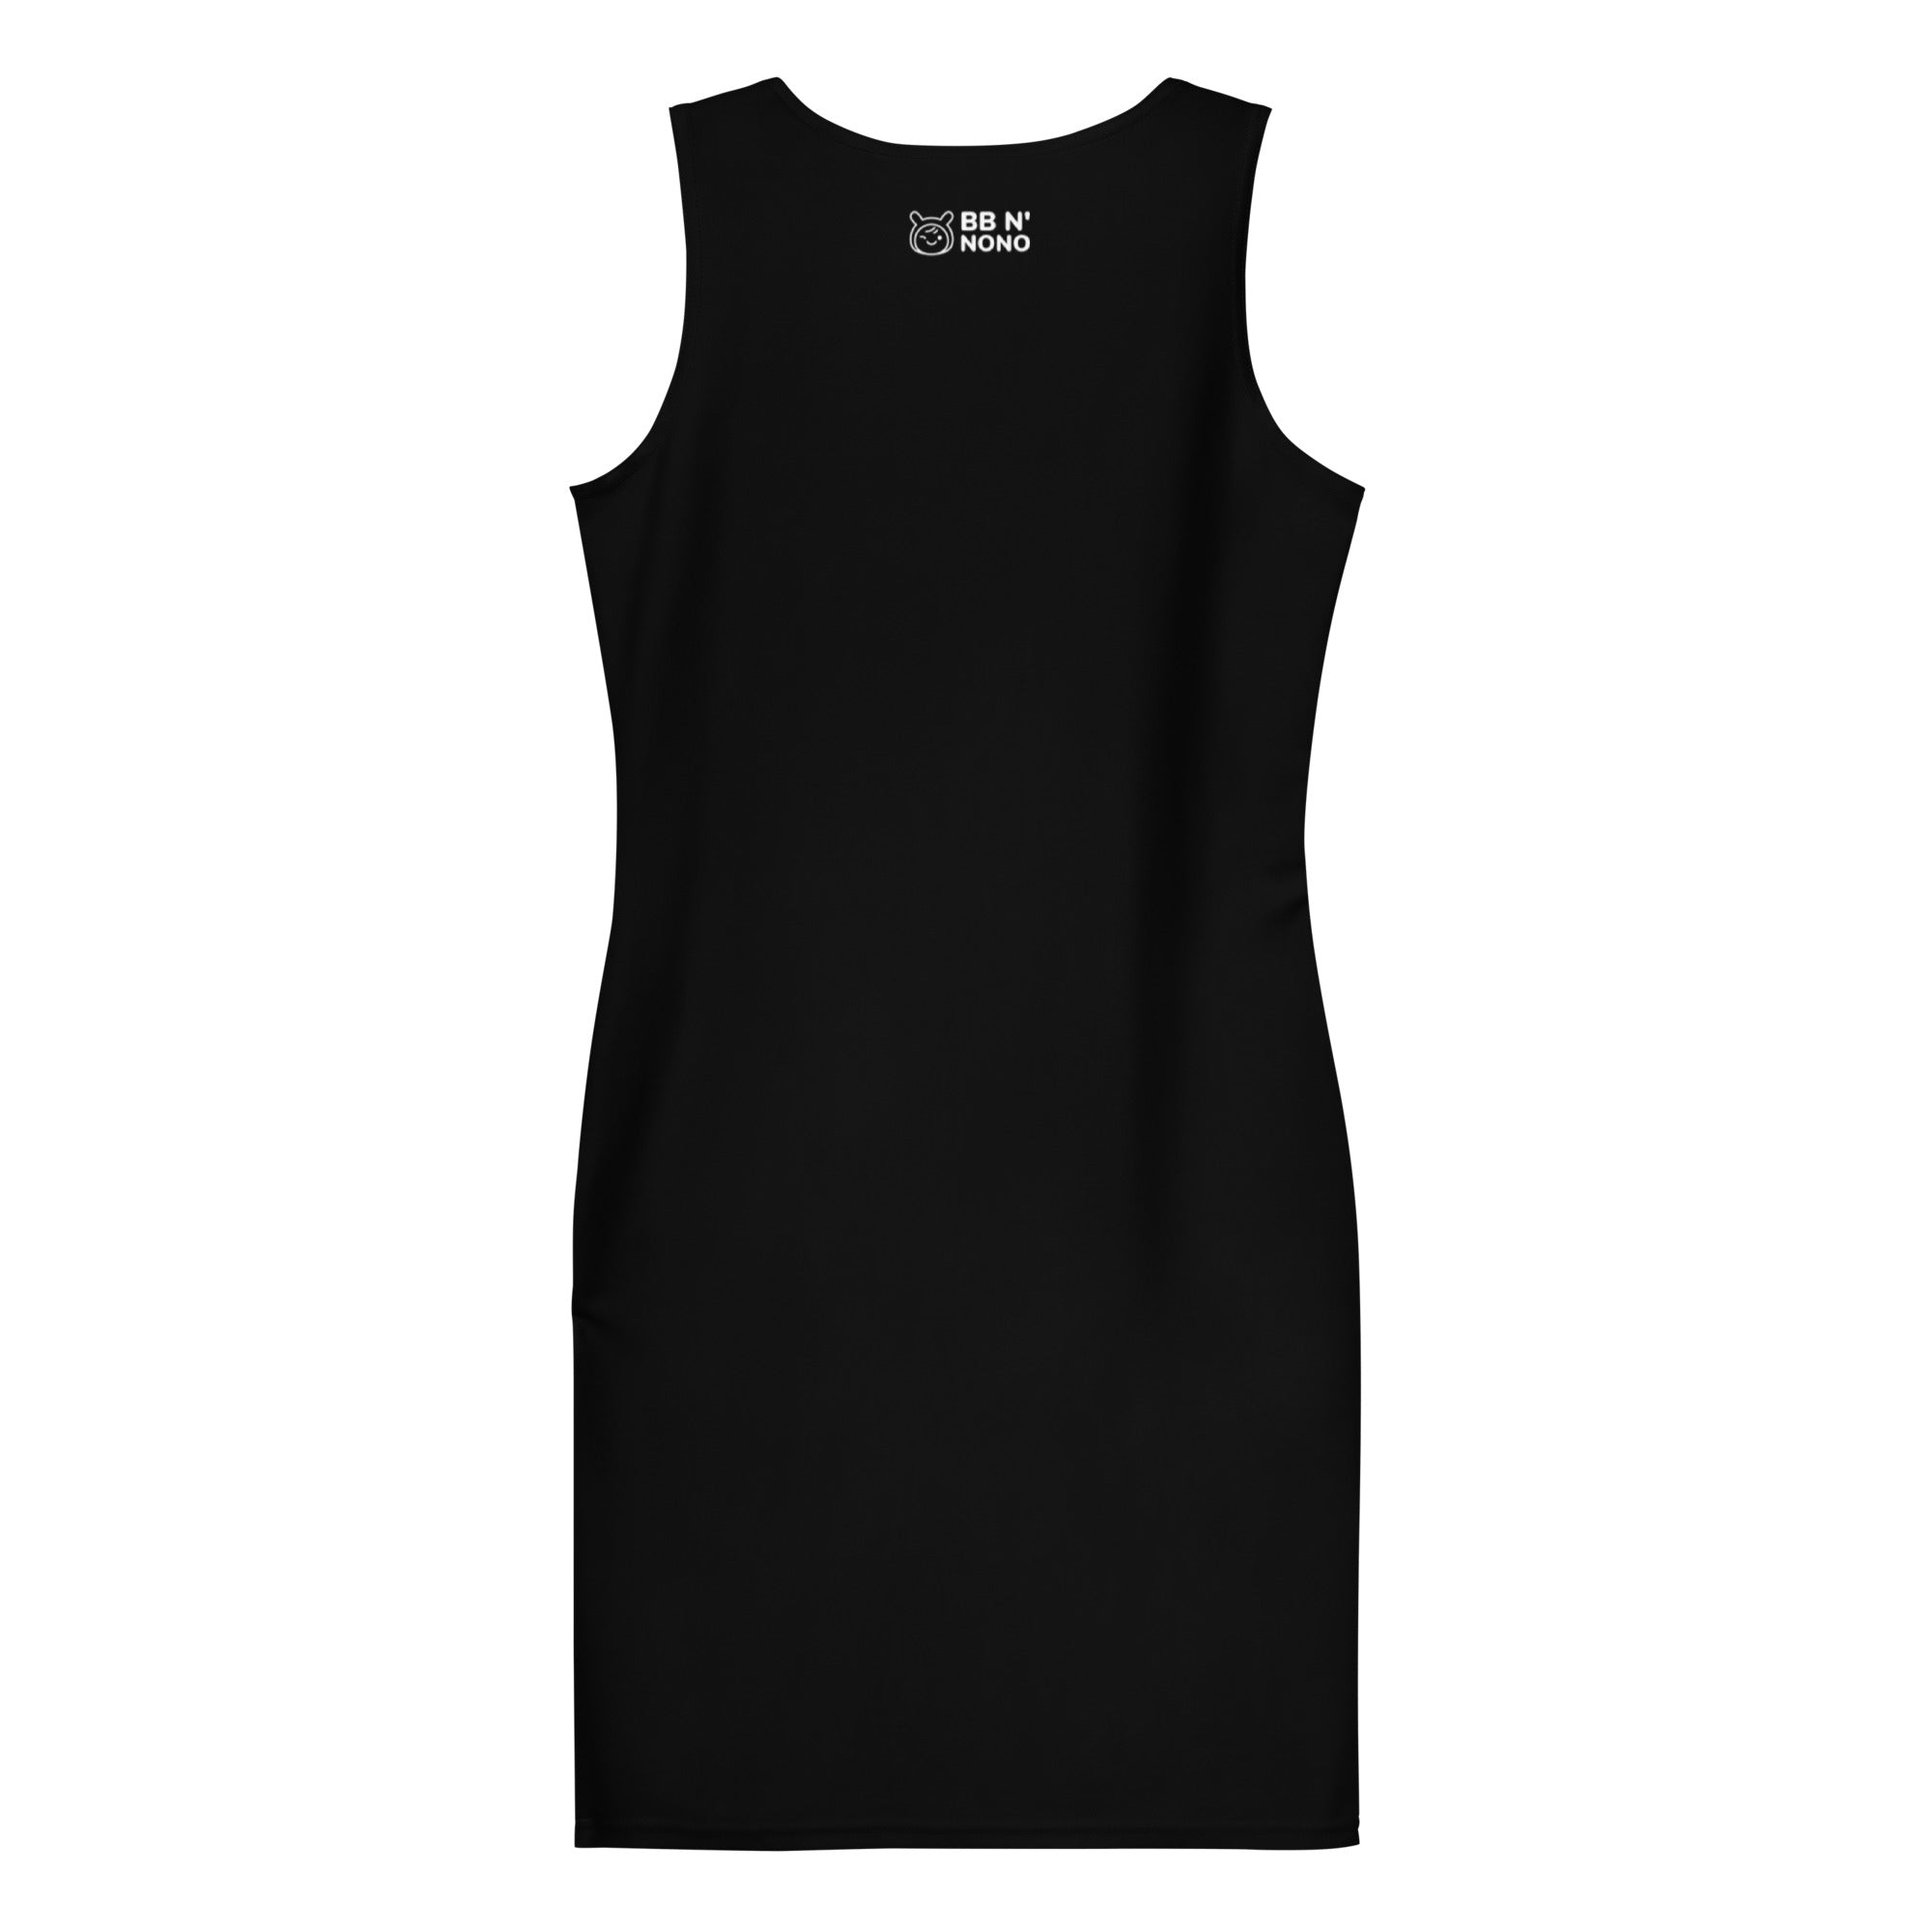 Too glam to give a damn - Bodycon dress (Black)